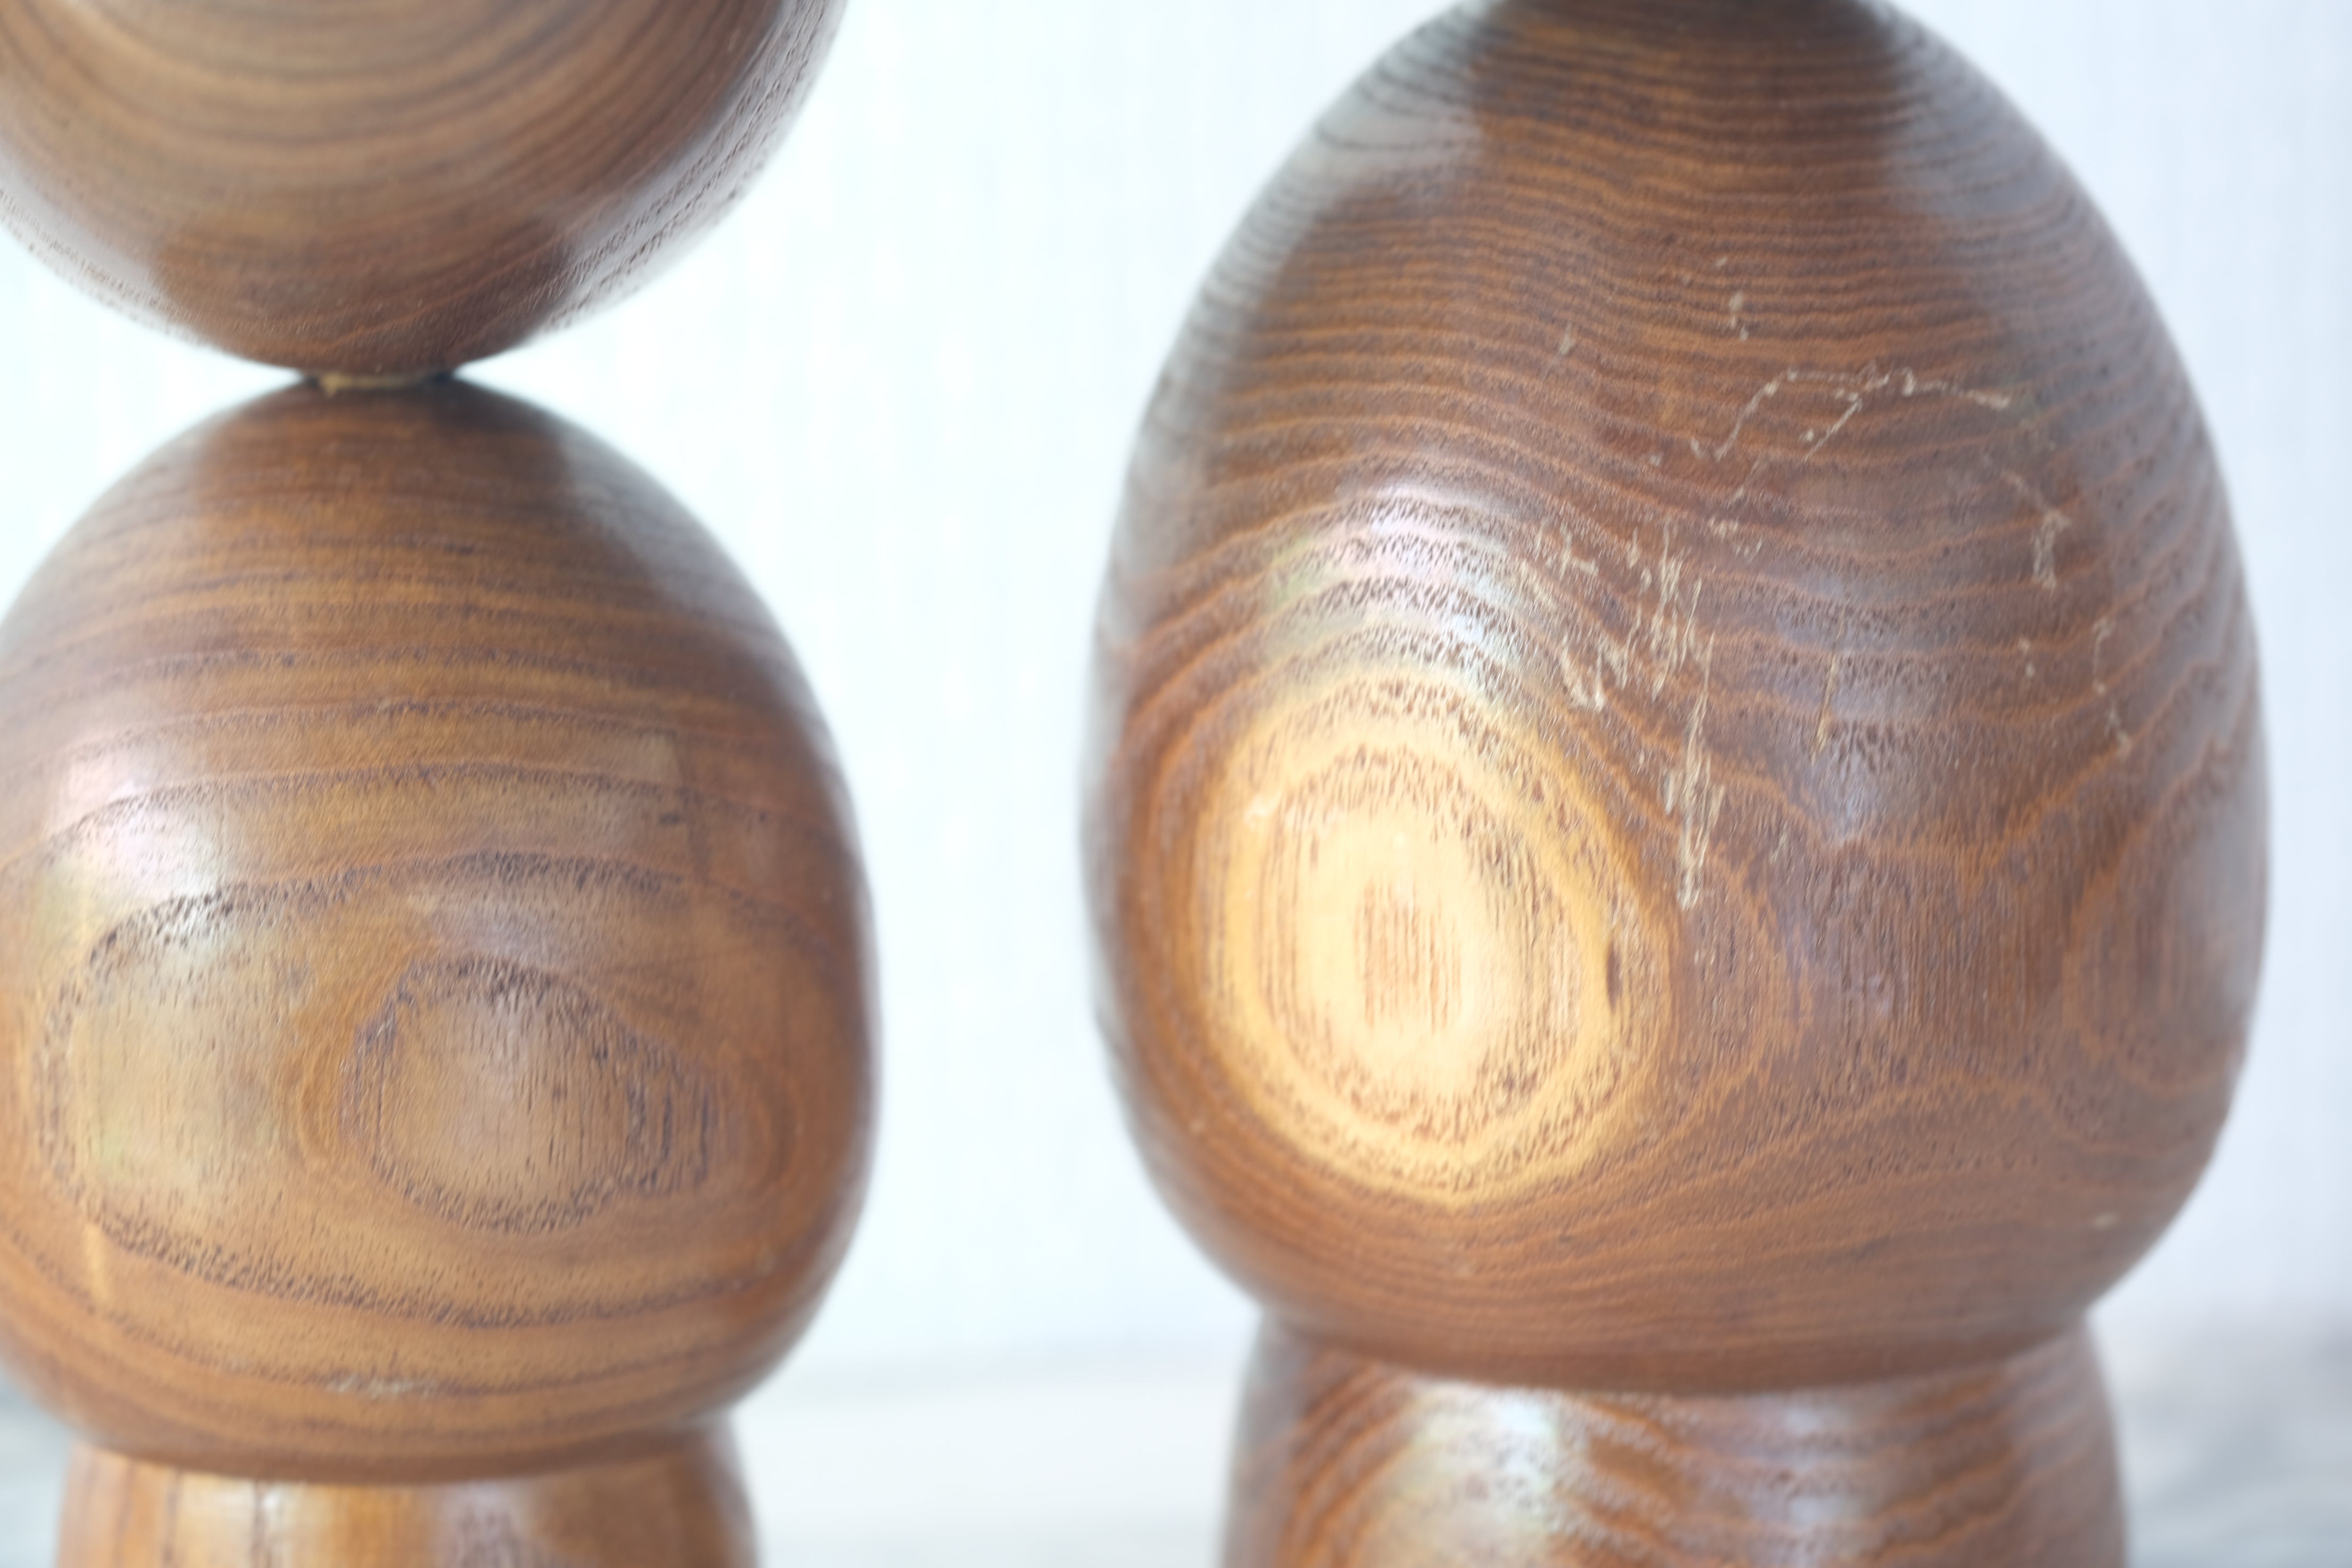 Exclusive Pair of Vintage Creative Kokeshi by Hideo Ishihara (1925-1999) | 16 cm and 20,5 cm